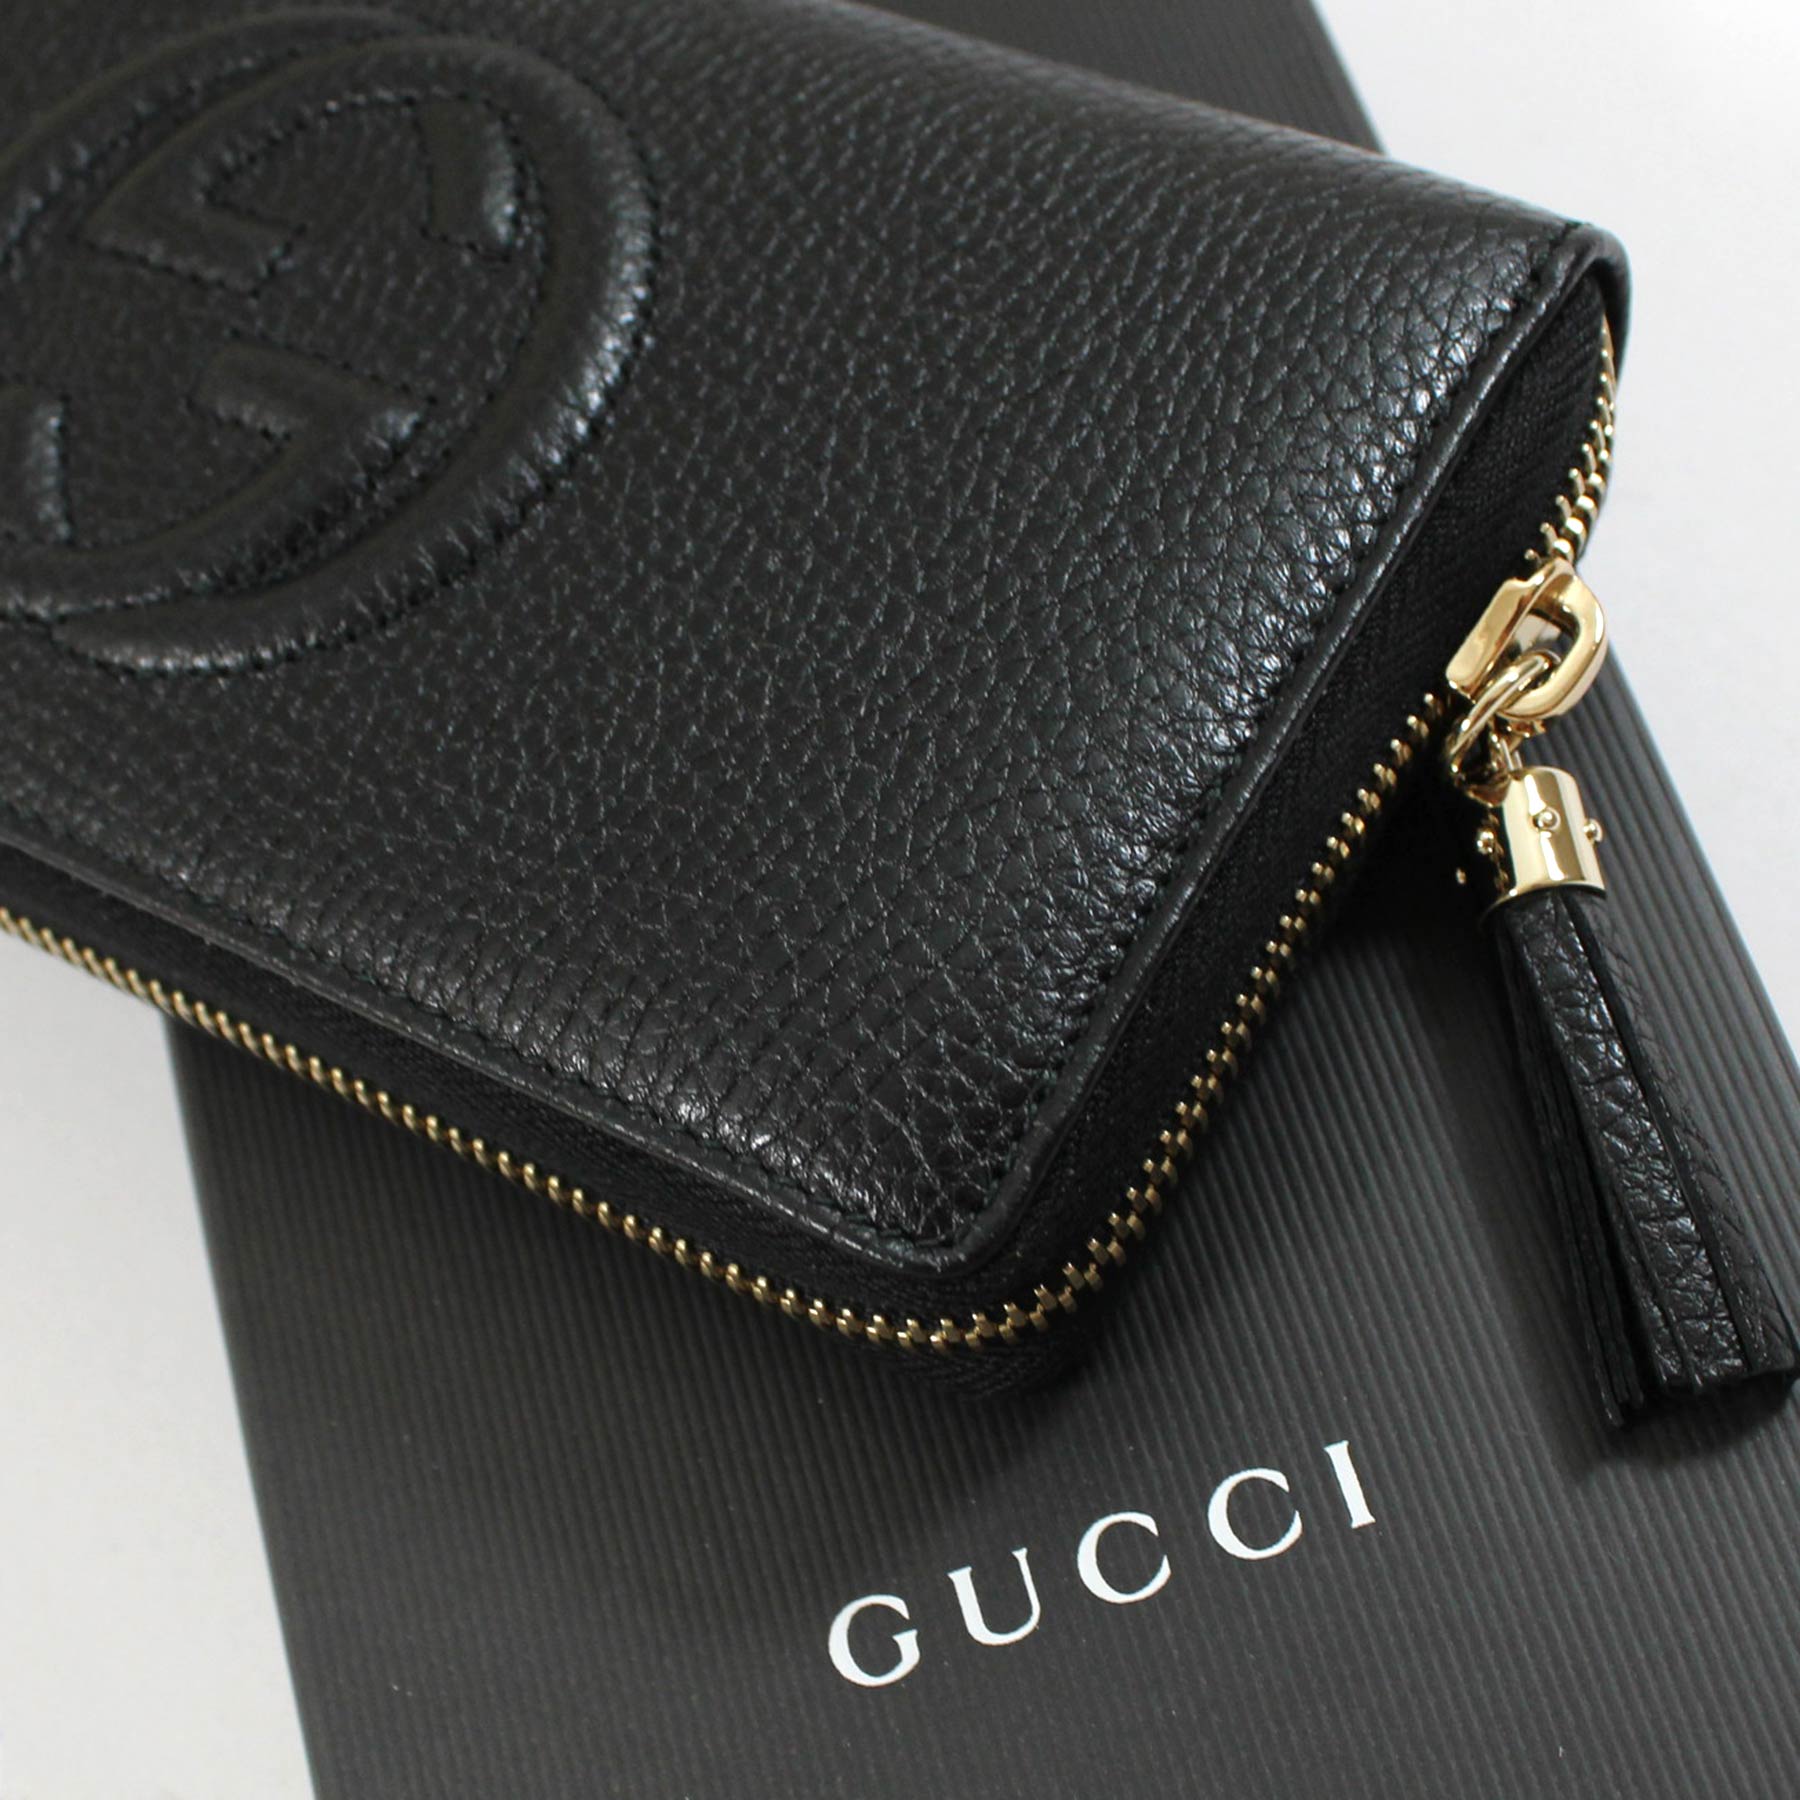 Gucci Leather Wallet Black GG Cellarius - Women Collection